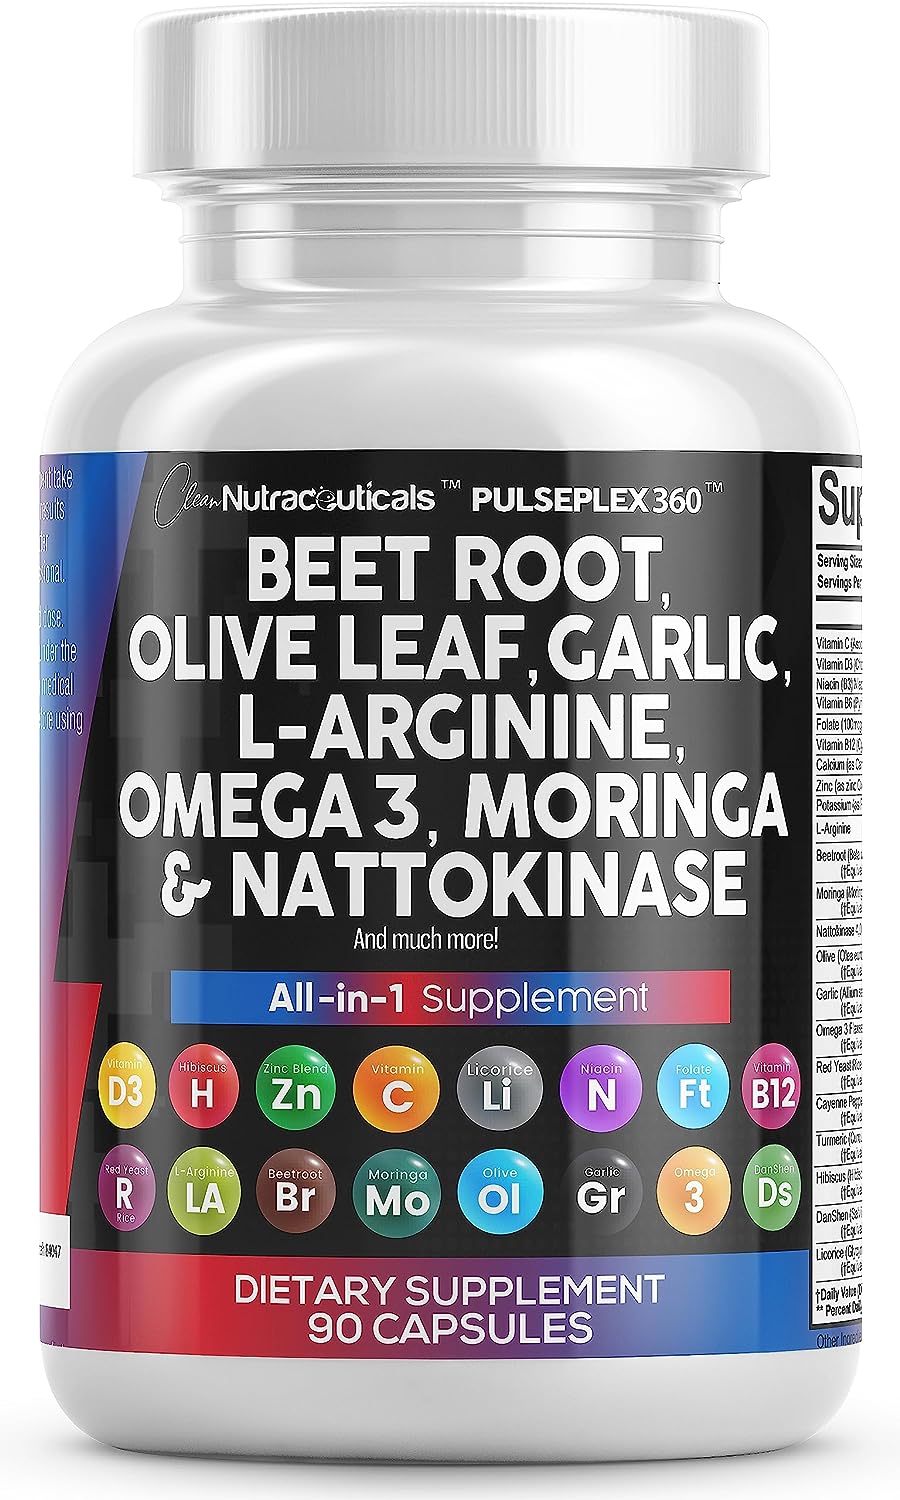 Pulseplex 360™ with Beet Root and Olive Leaf